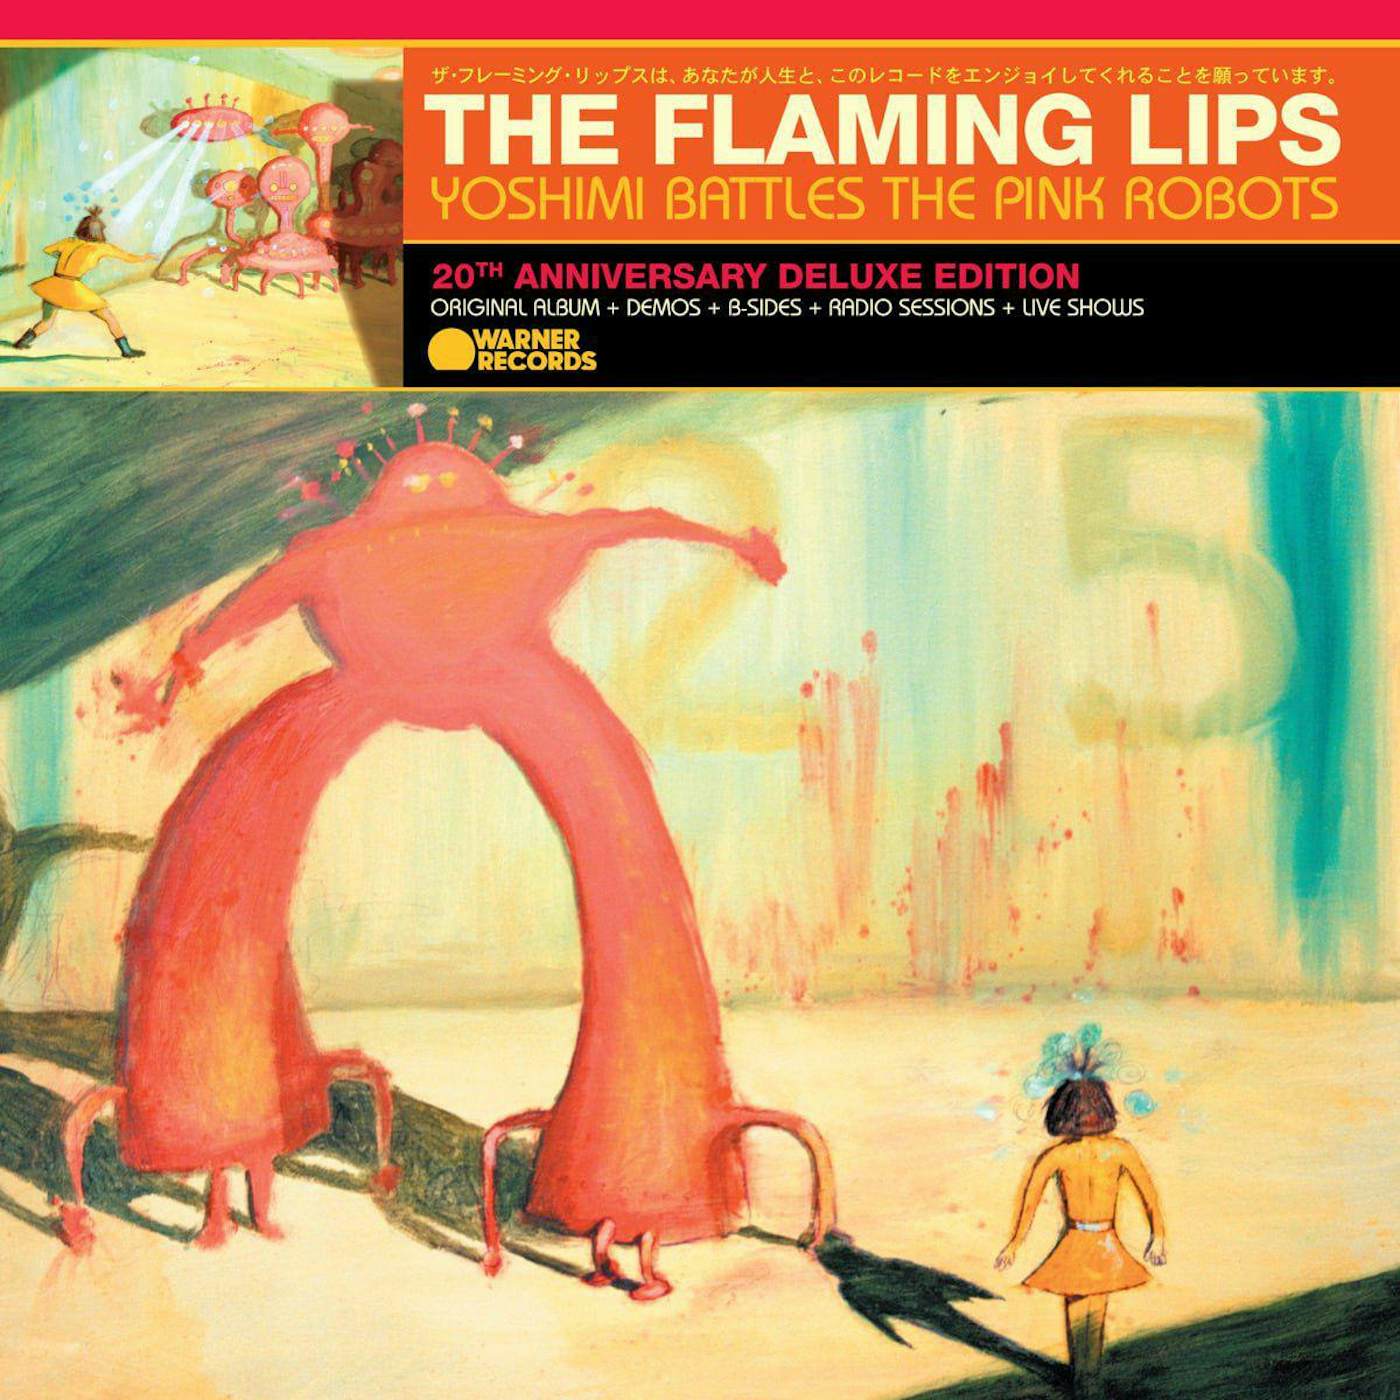 The Flaming Lips Yoshimi Battles the Pink Robots (20th Anniversary Deluxe Edition 5LP) Box Set (Vinyl)